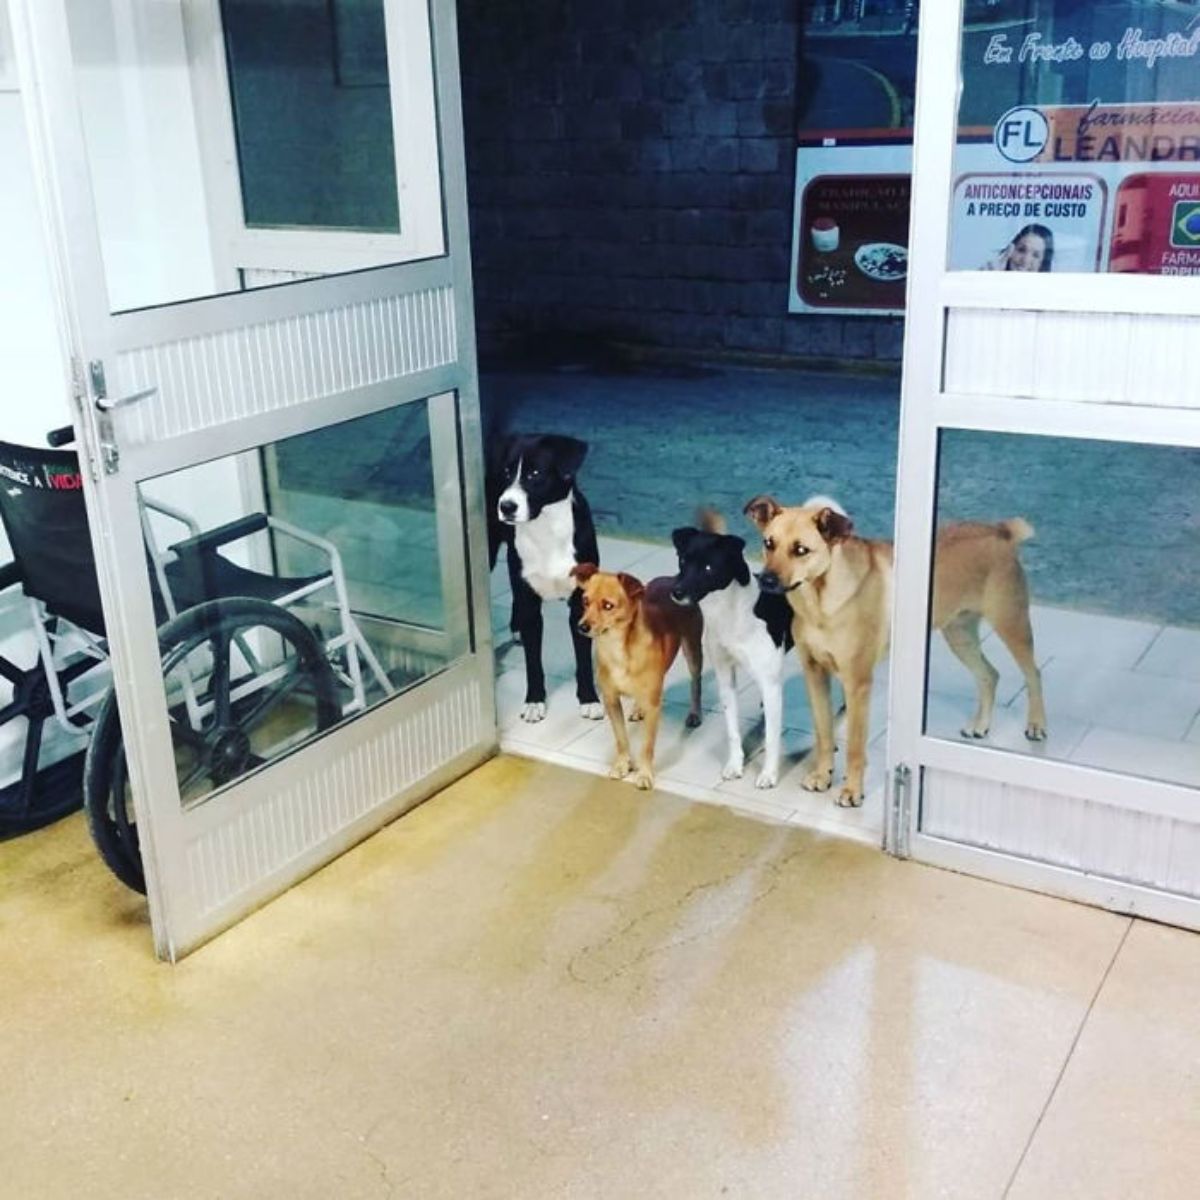 2 black and white dogs and 2 brown dogs standing at a hospital entrance looking in